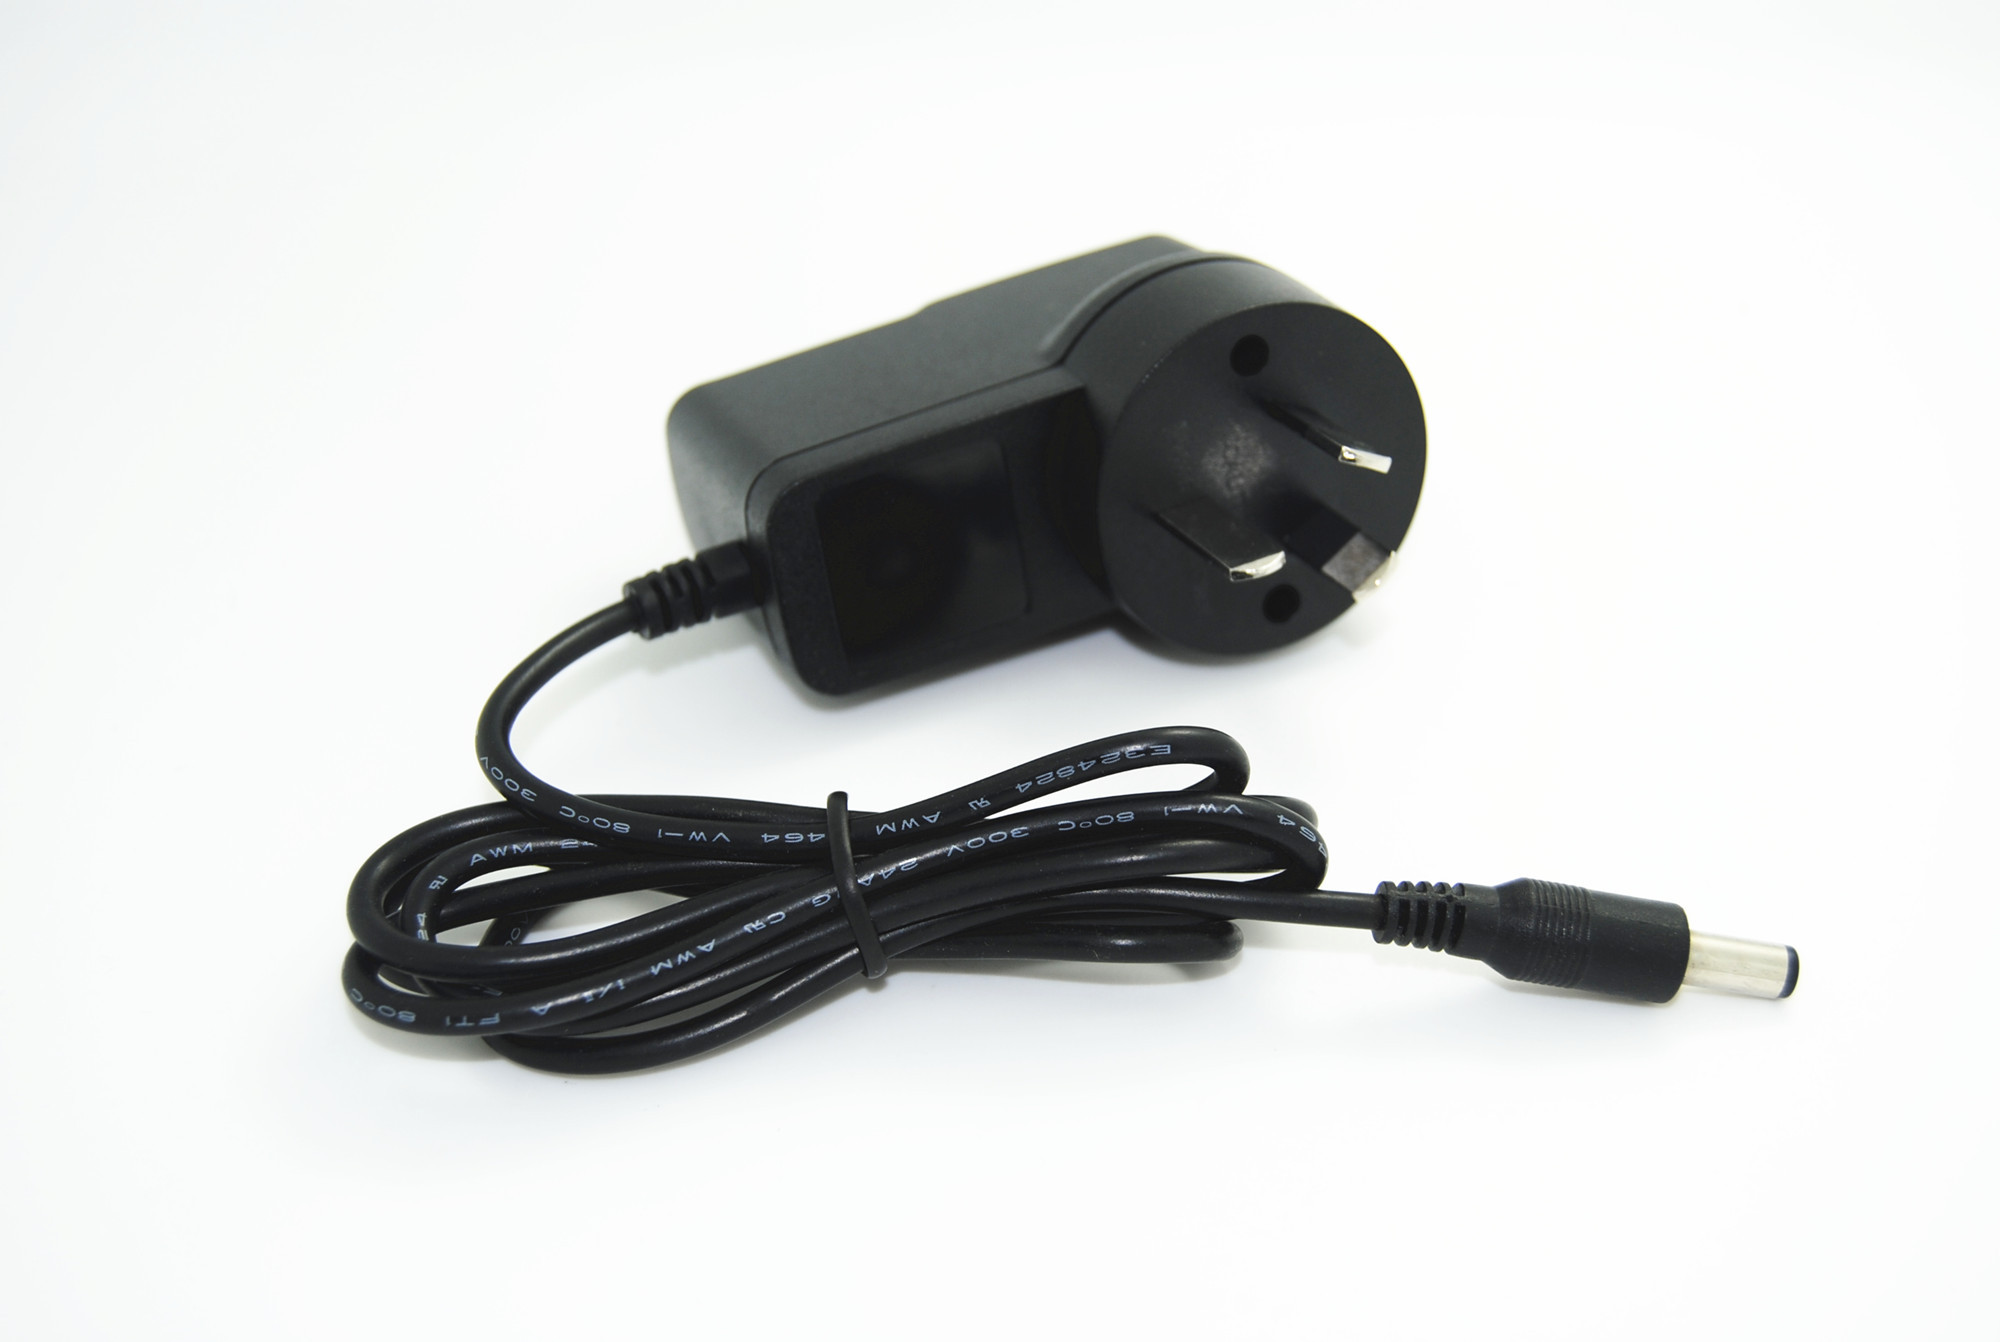 Universal AC Power Adapters with 6W Output and SAA Certificate , 1.2M DC Cord